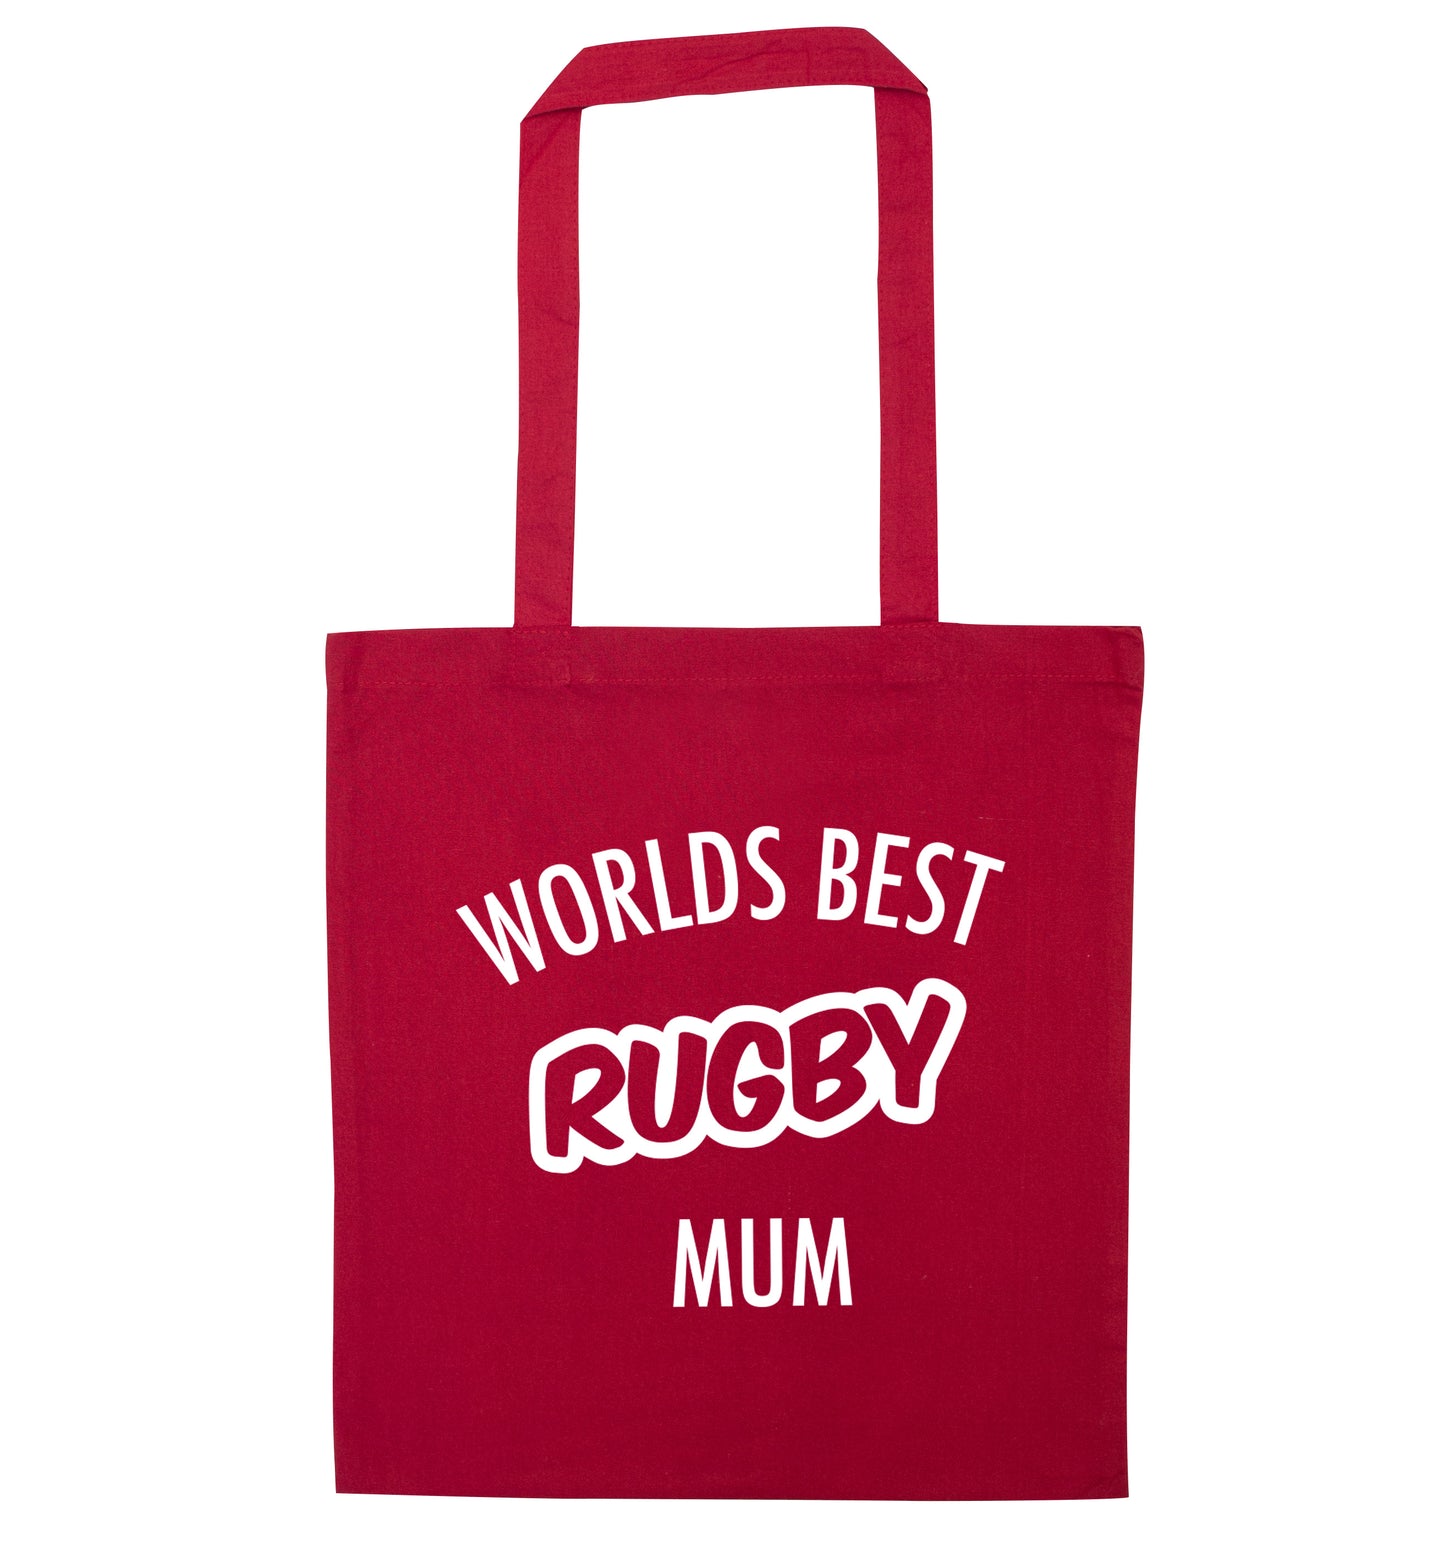 Worlds best rugby mum red tote bag